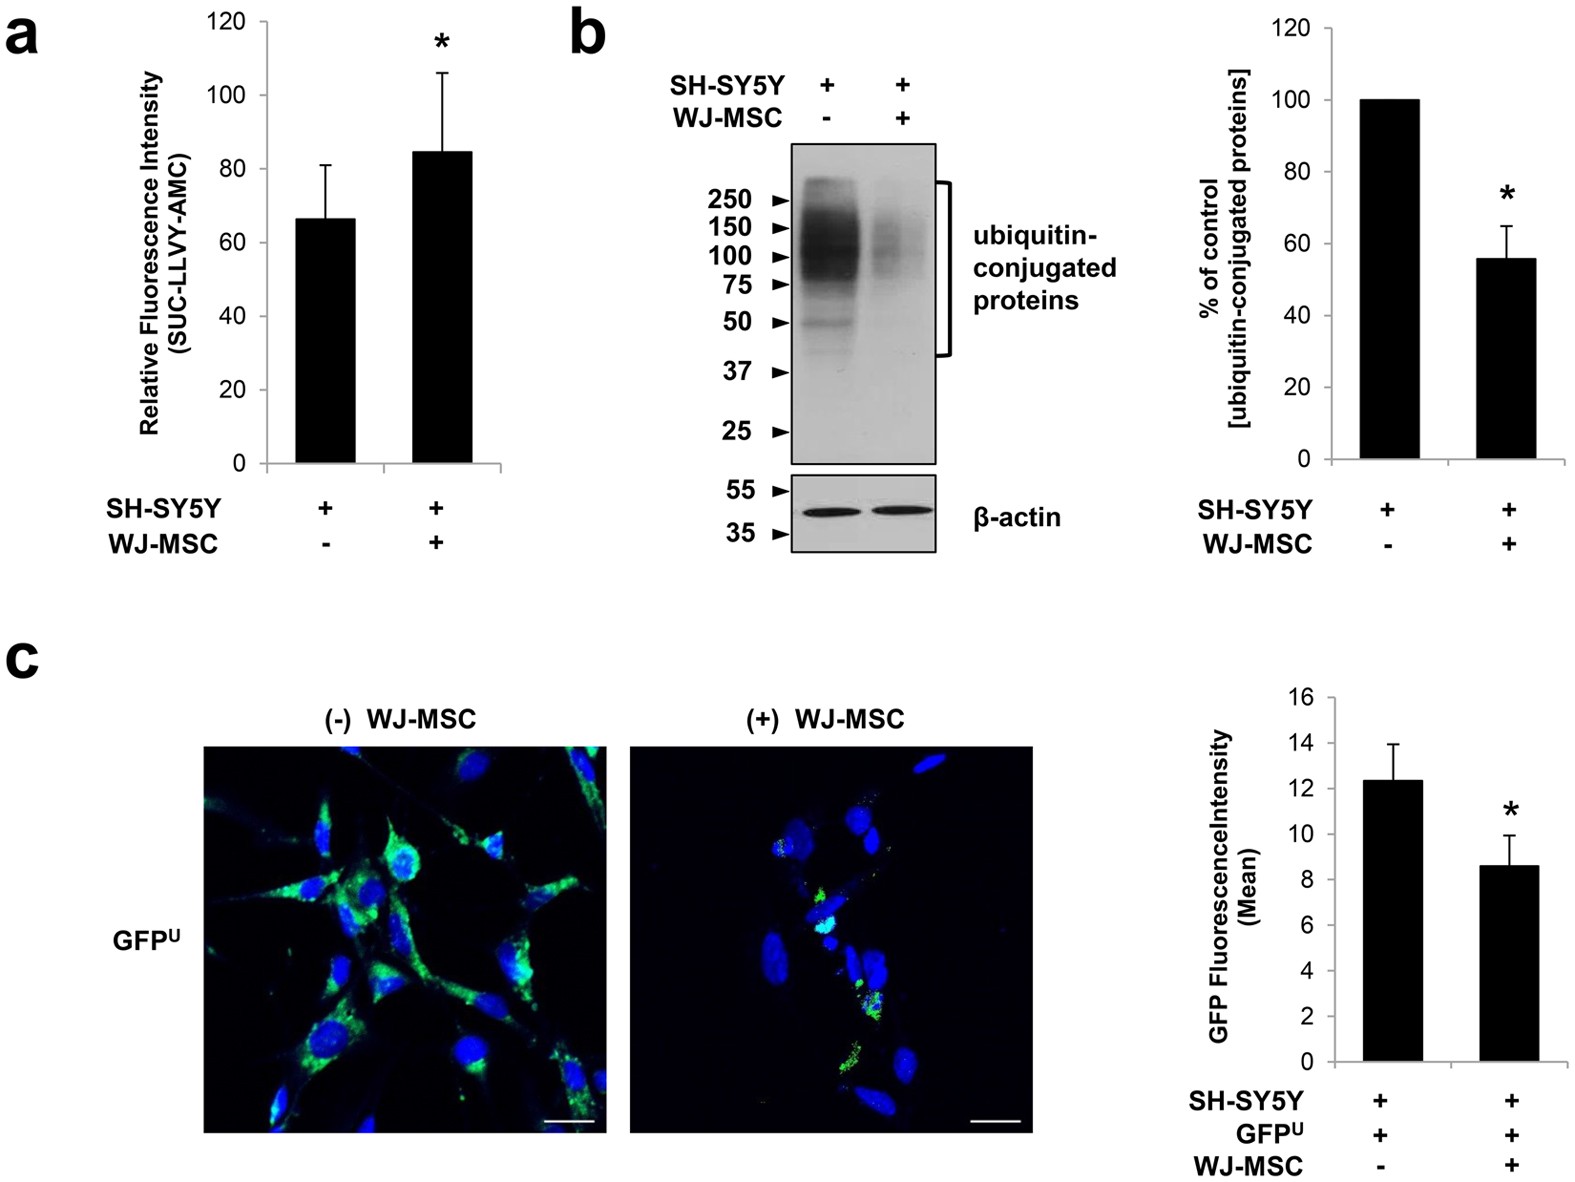 Agouti Related Peptide Secreted Via Human Mesenchymal Stem Cells  Upregulates Proteasome Activity in an Alzheimer's Disease Model |  Scientific Reports